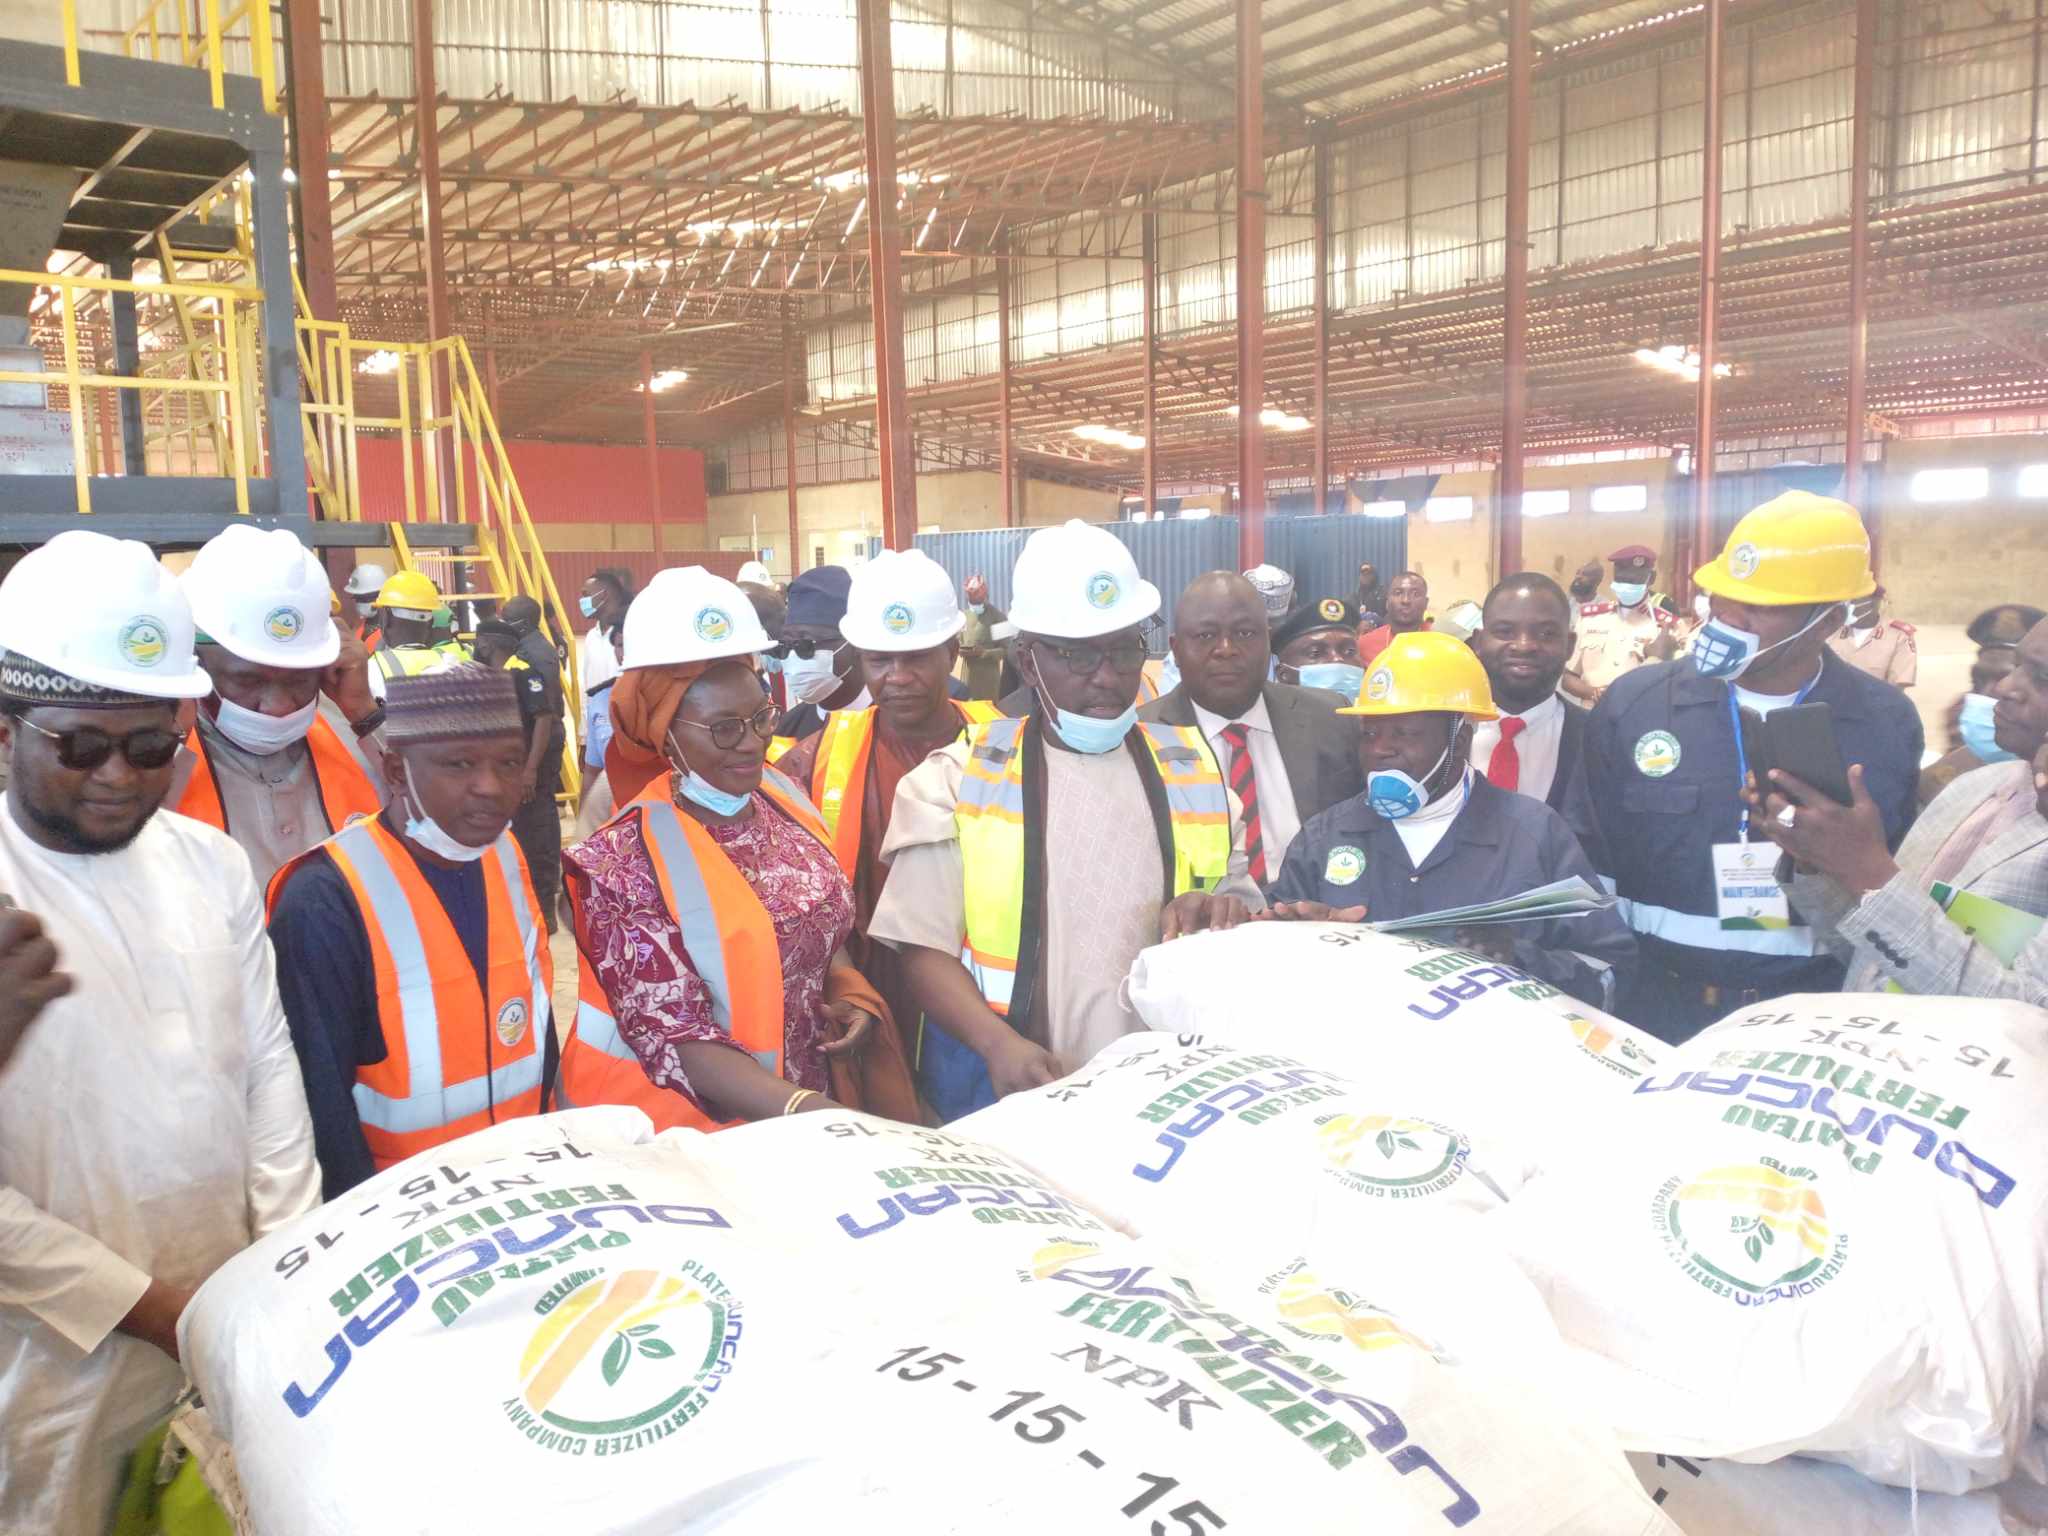 Duncan Group Commissions Multi-billion Naira Fertilizer Blending Plant in Plateau State, Promises Quality Products